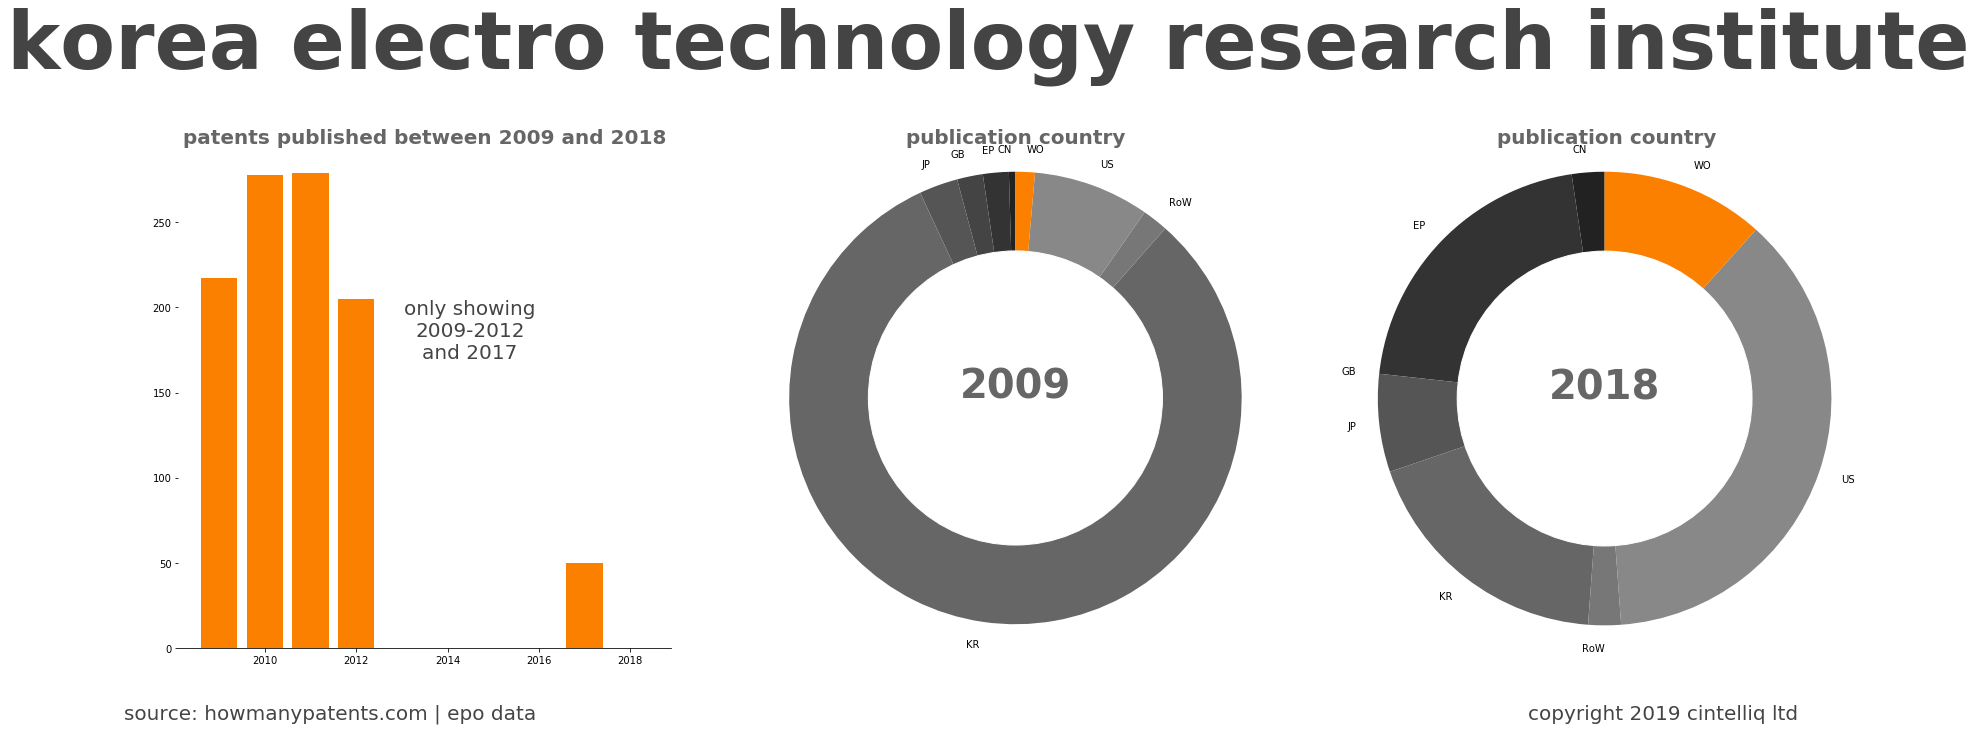 summary of patents for Korea Electro Technology Research Institute